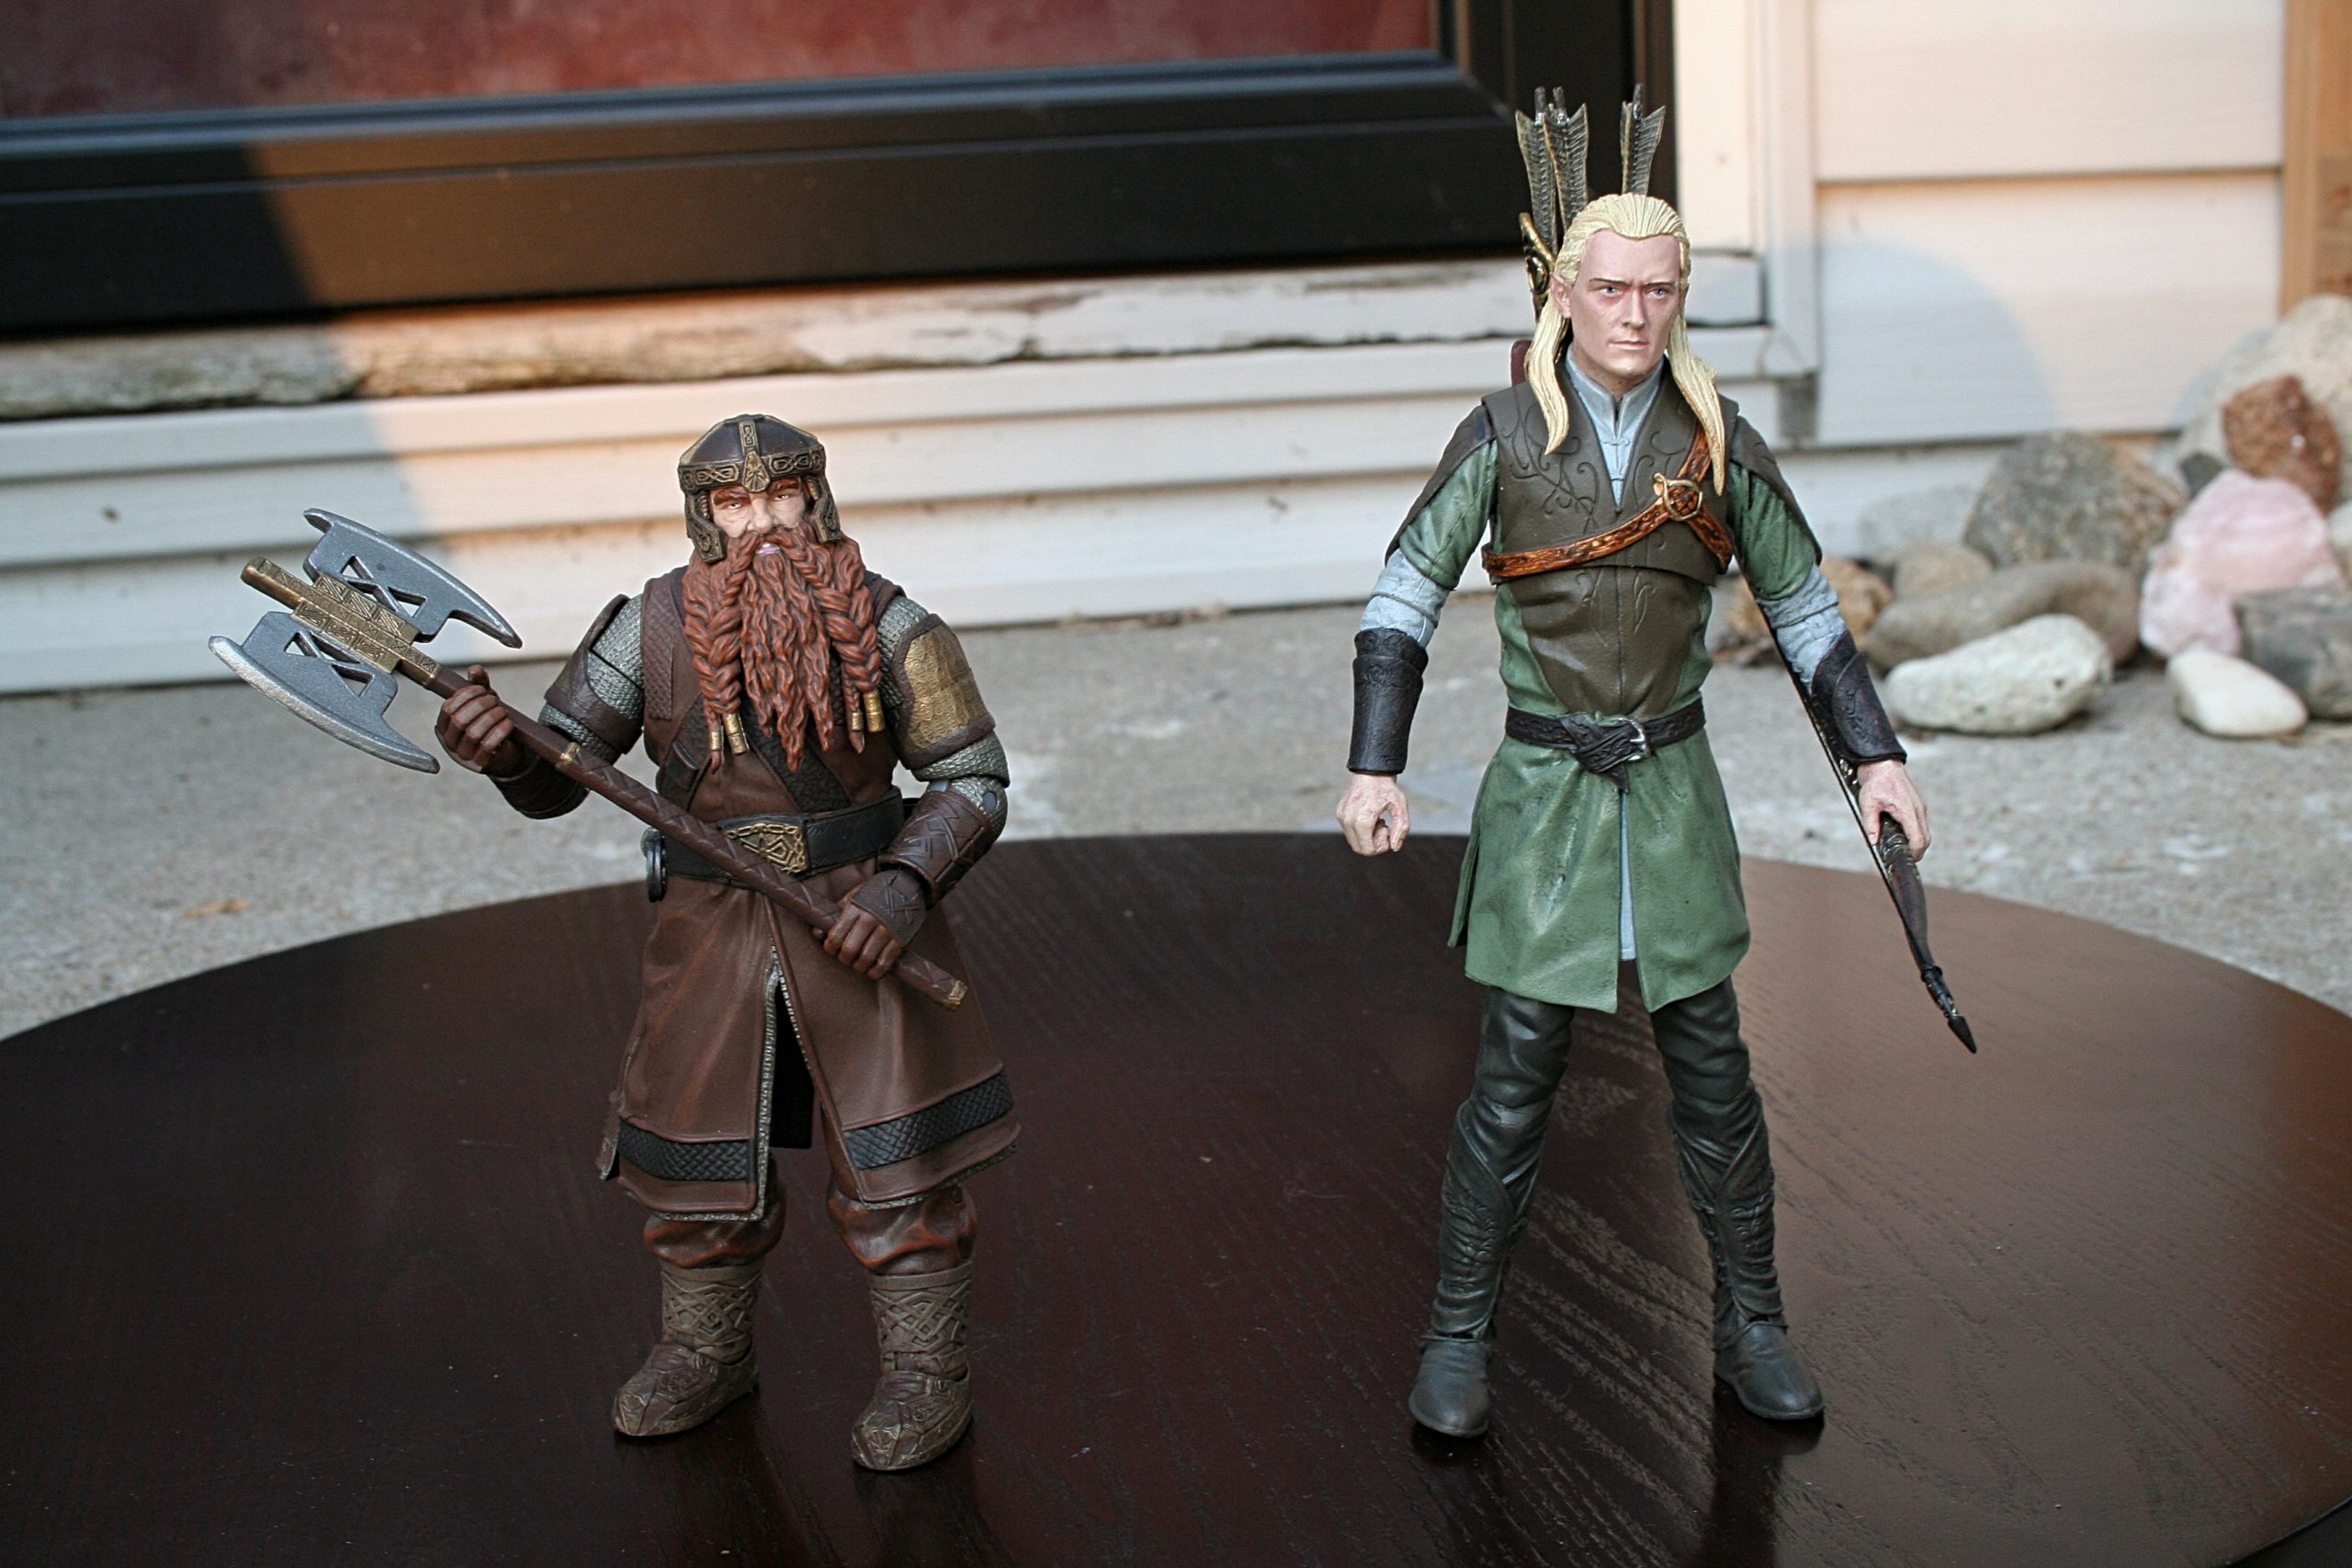 A picture of Legolas figure from Diamond Select : r/lotr